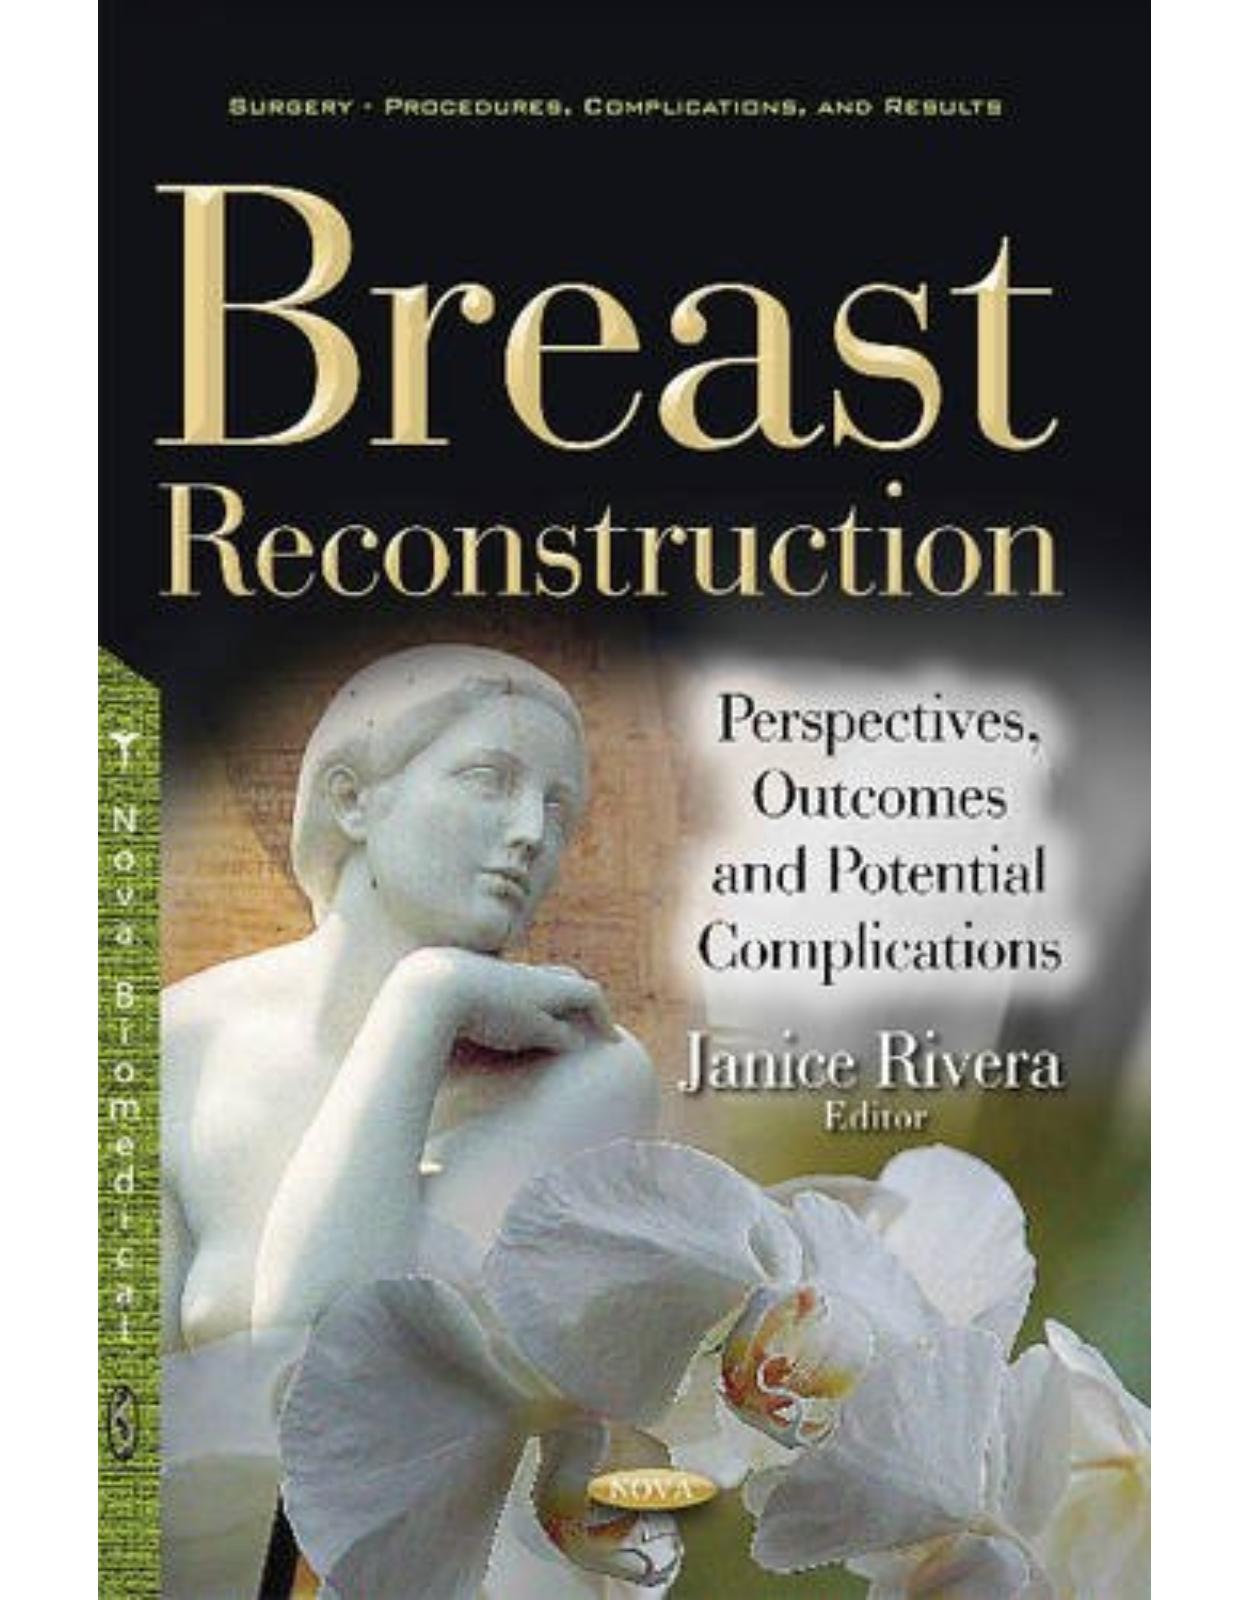 Breast Reconstruction: Perspectives, Outcomes & Potential Complications